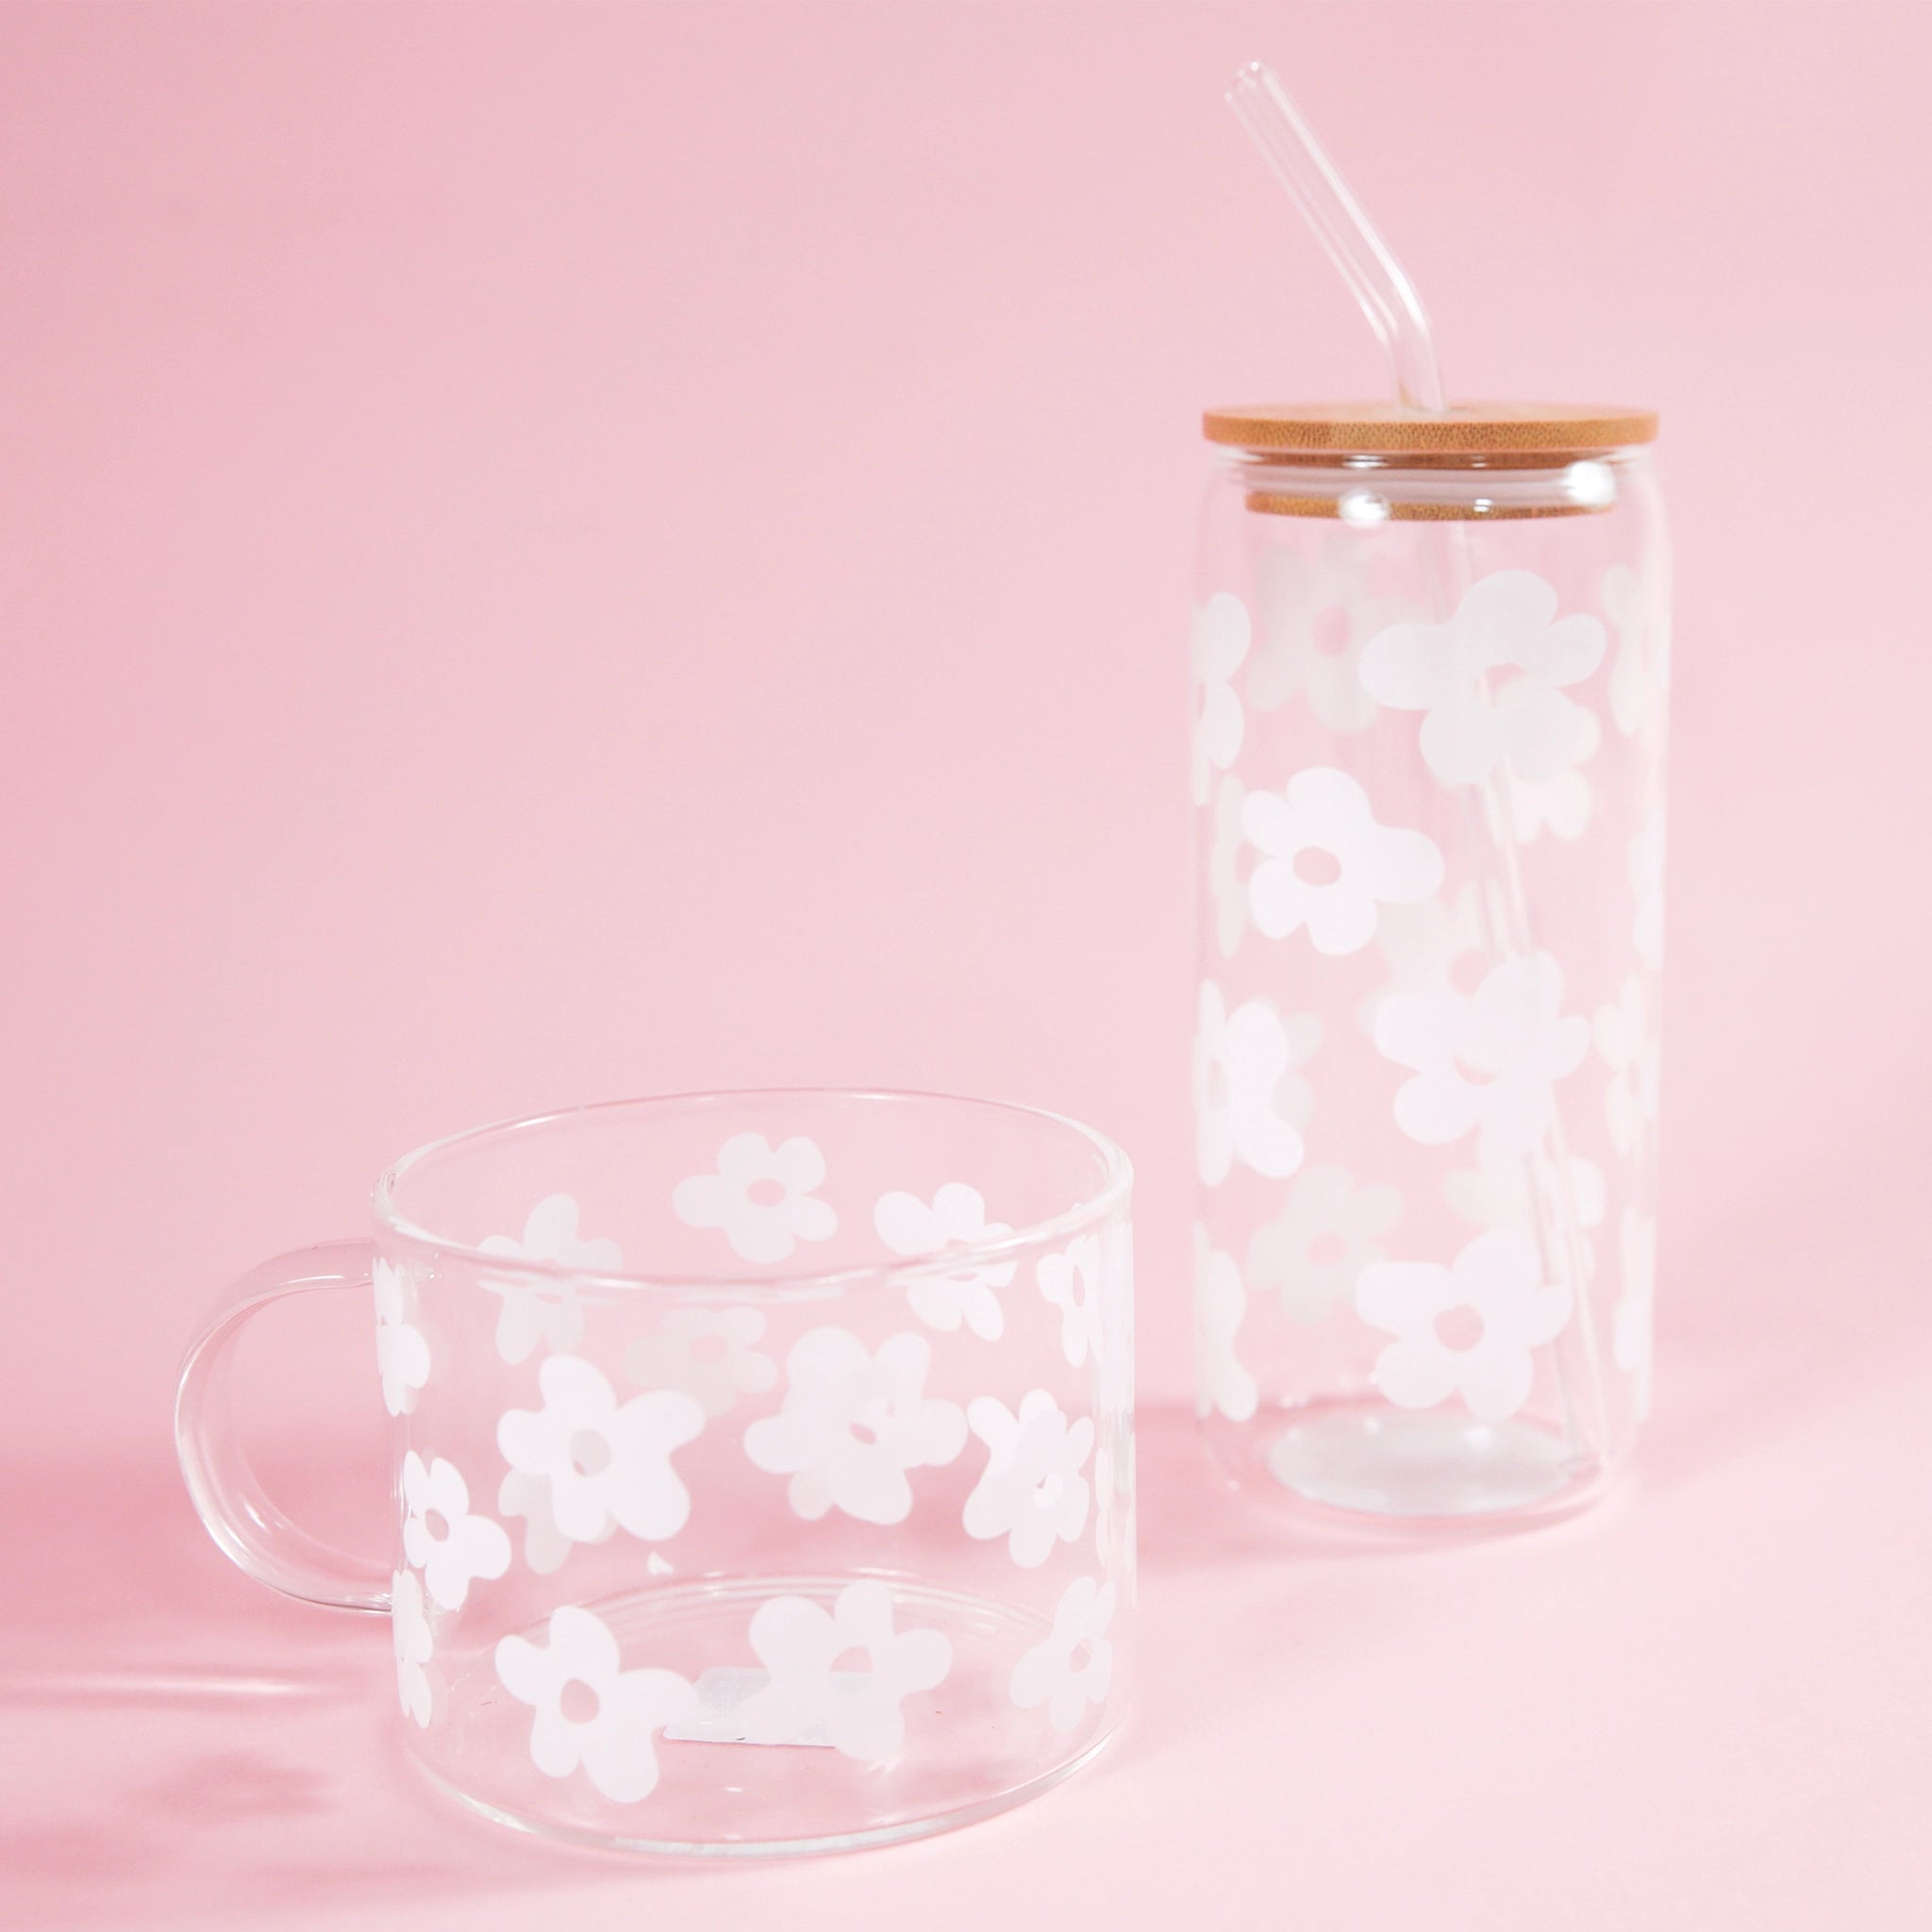 On a light pink background is a clear glass mug with a white daisy design all over photographed next to a taller glass tumbler with a wood lid and glass straw.